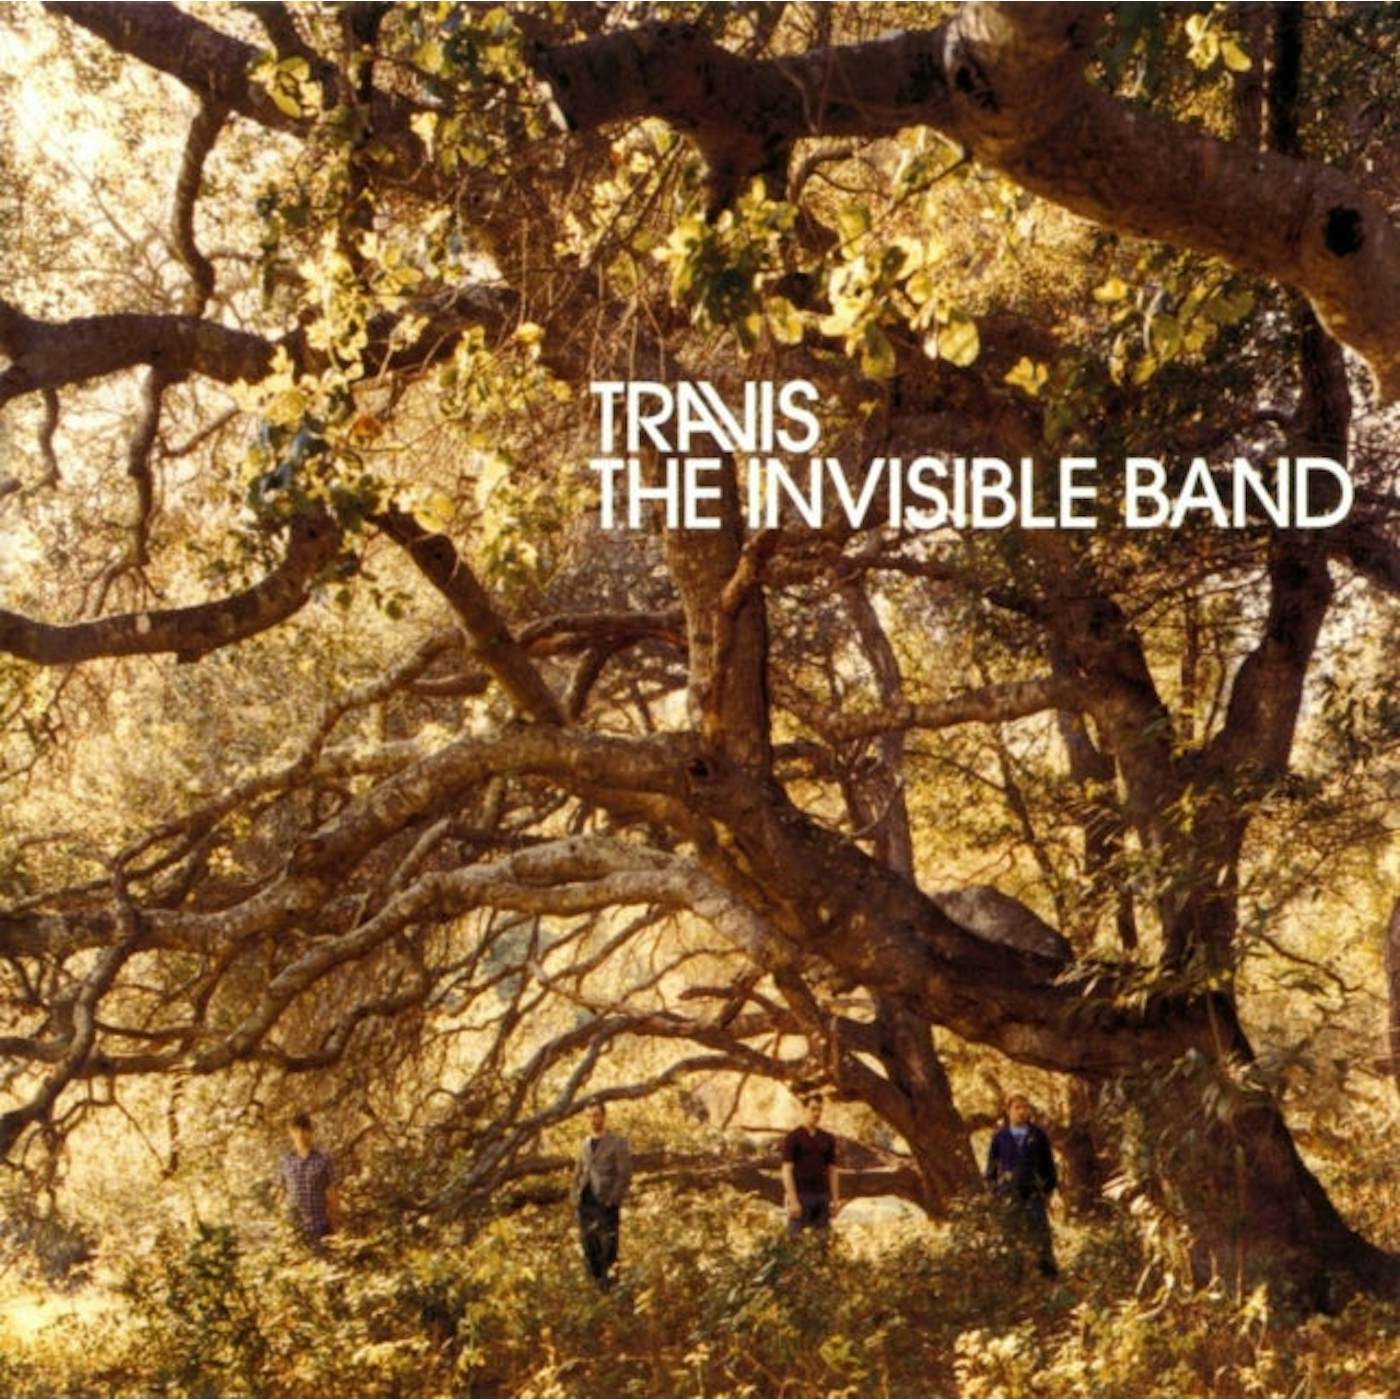 Travis LP Vinyl Record - The Invisible Band